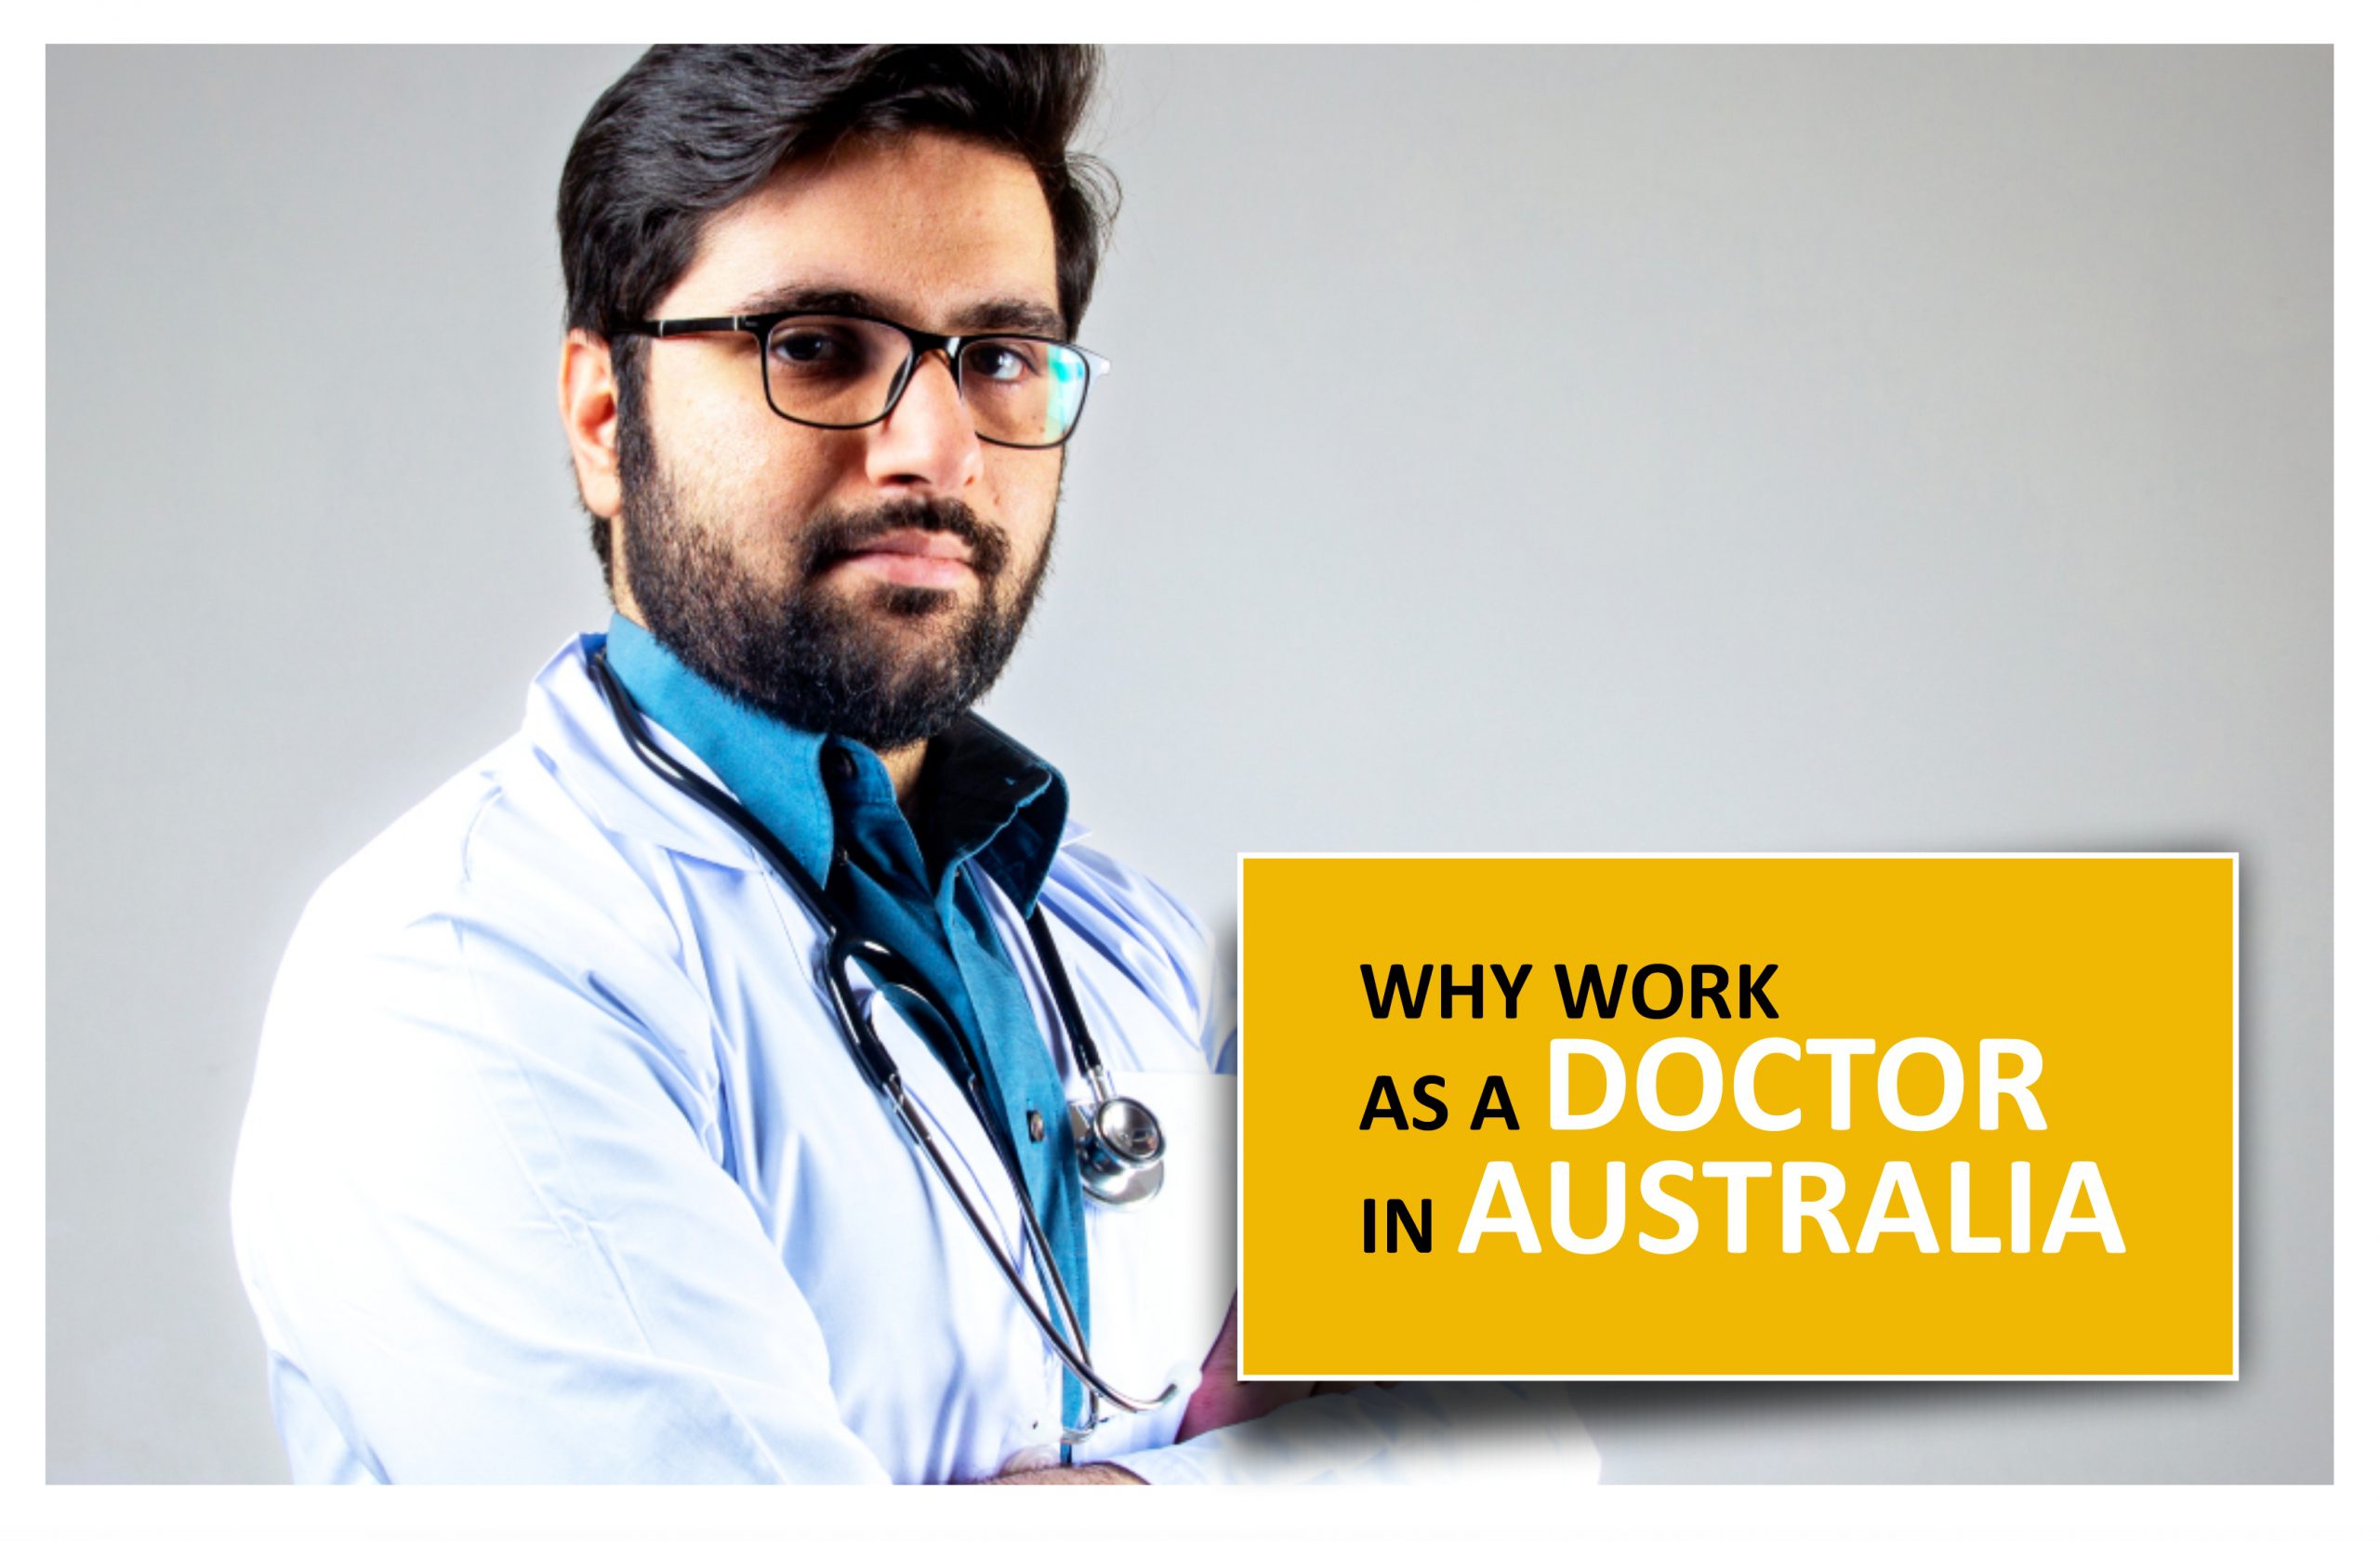 Why work as a doctor in Australia?